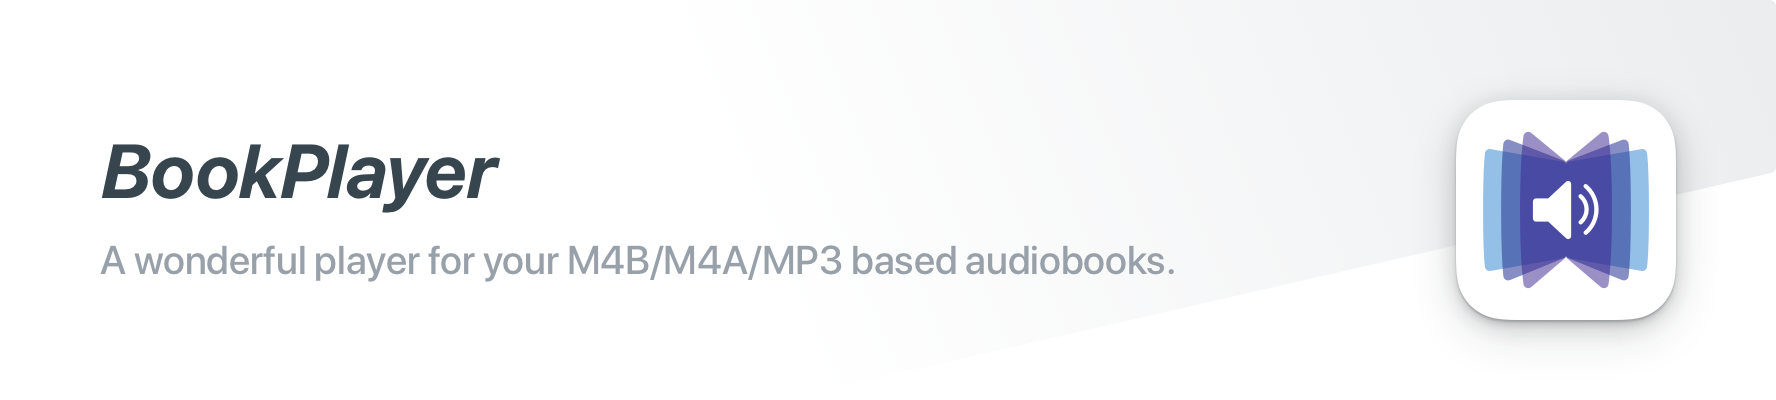 BookPlayer - A wonderful player for your M4B/M4A/MP3 based audiobooks.